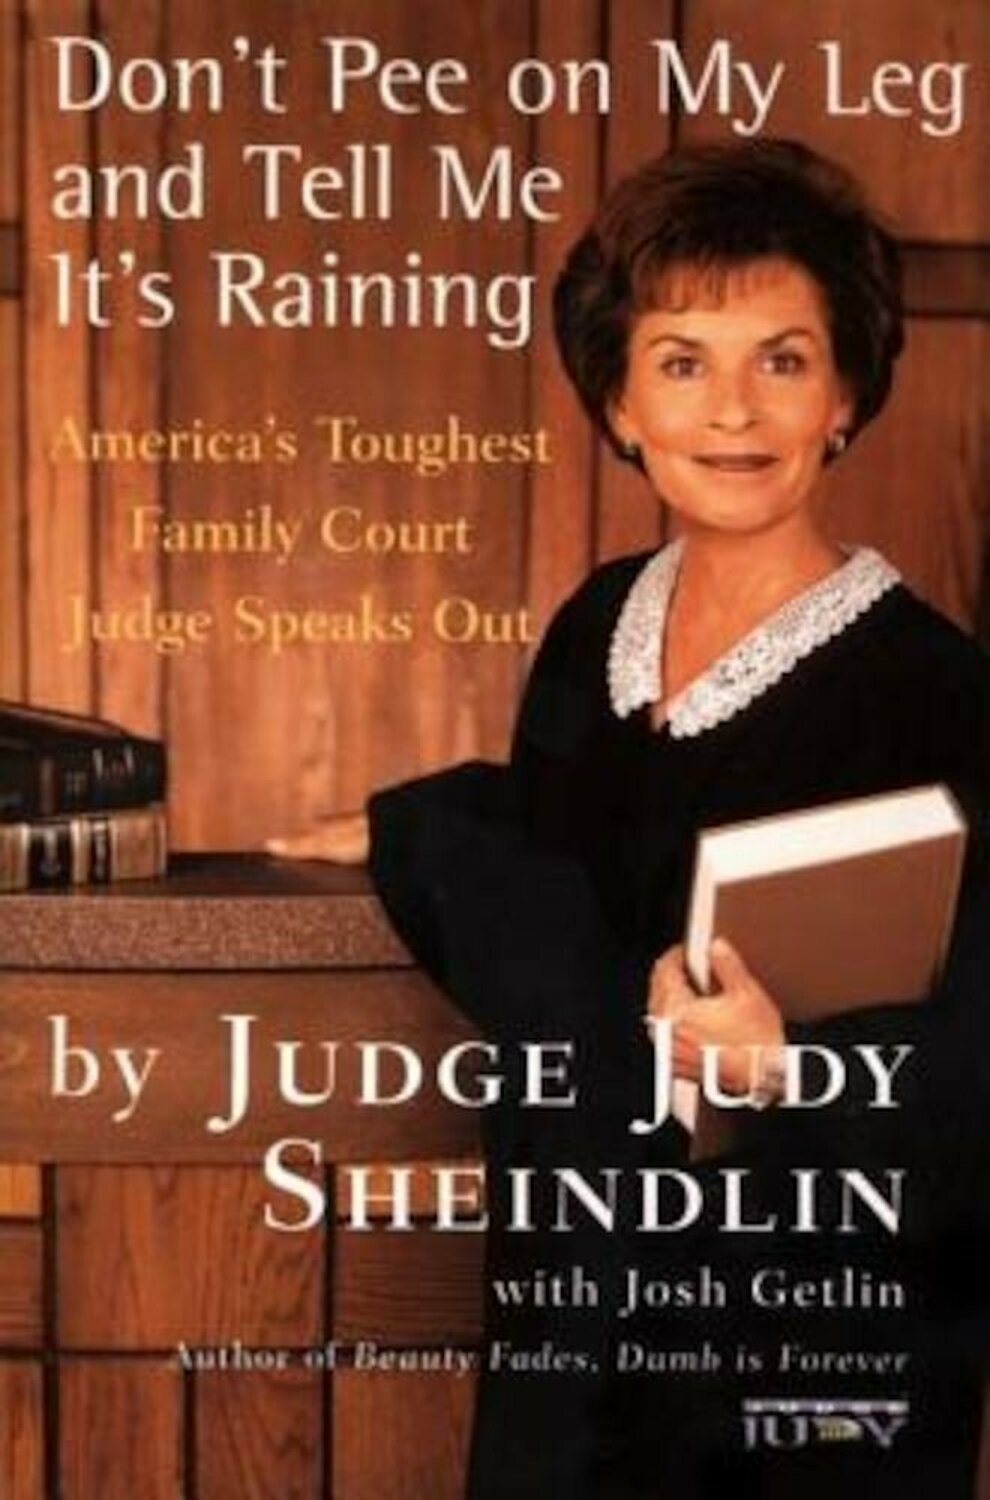 'Don't Pee on My Leg and Tell Me It's Raining' by Judy Sheindlin